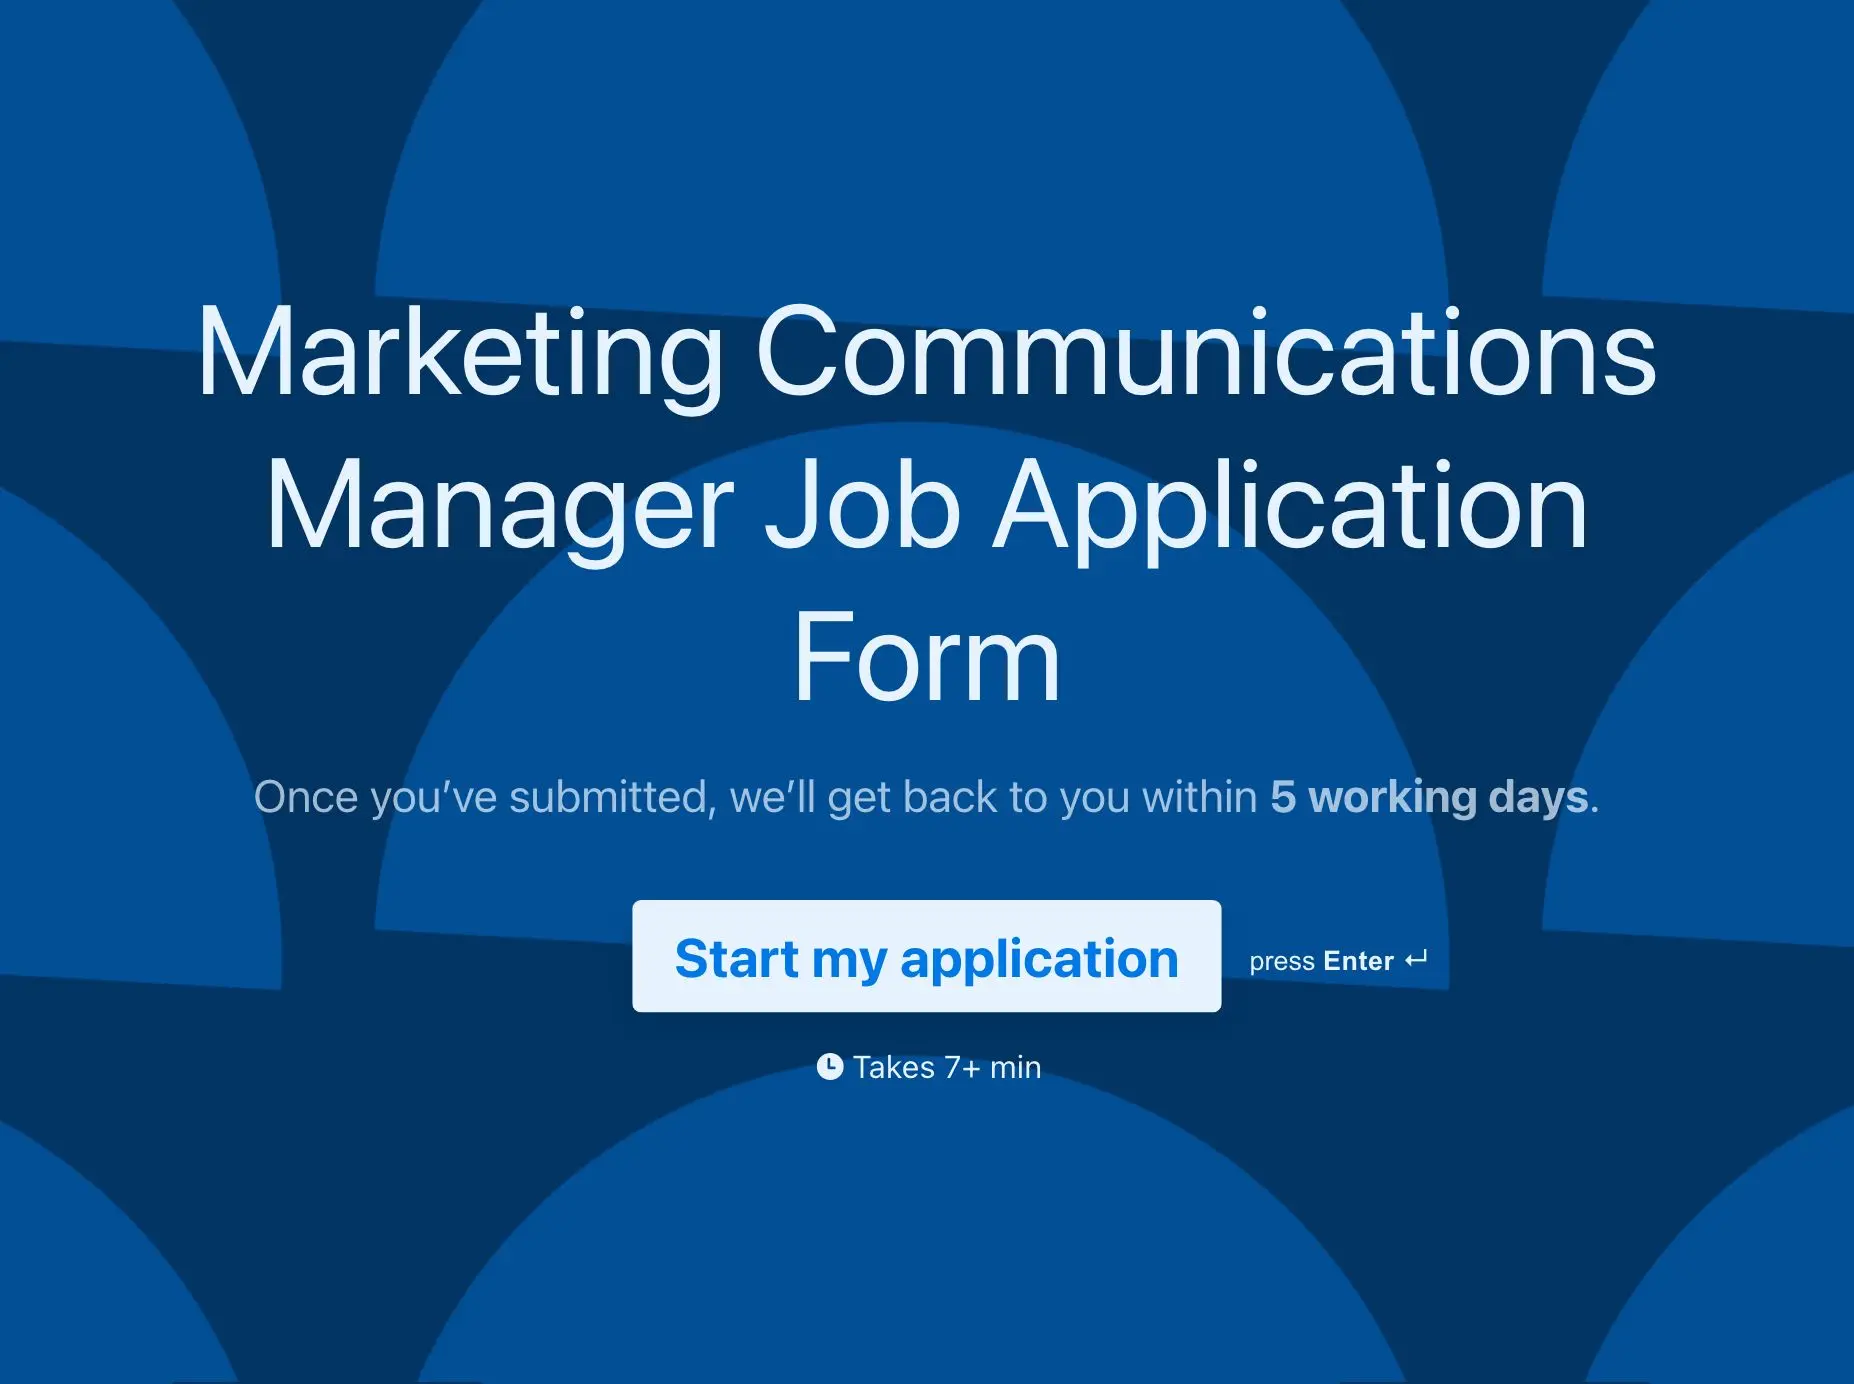 Marketing Communications Manager Job Application Form Template Hero